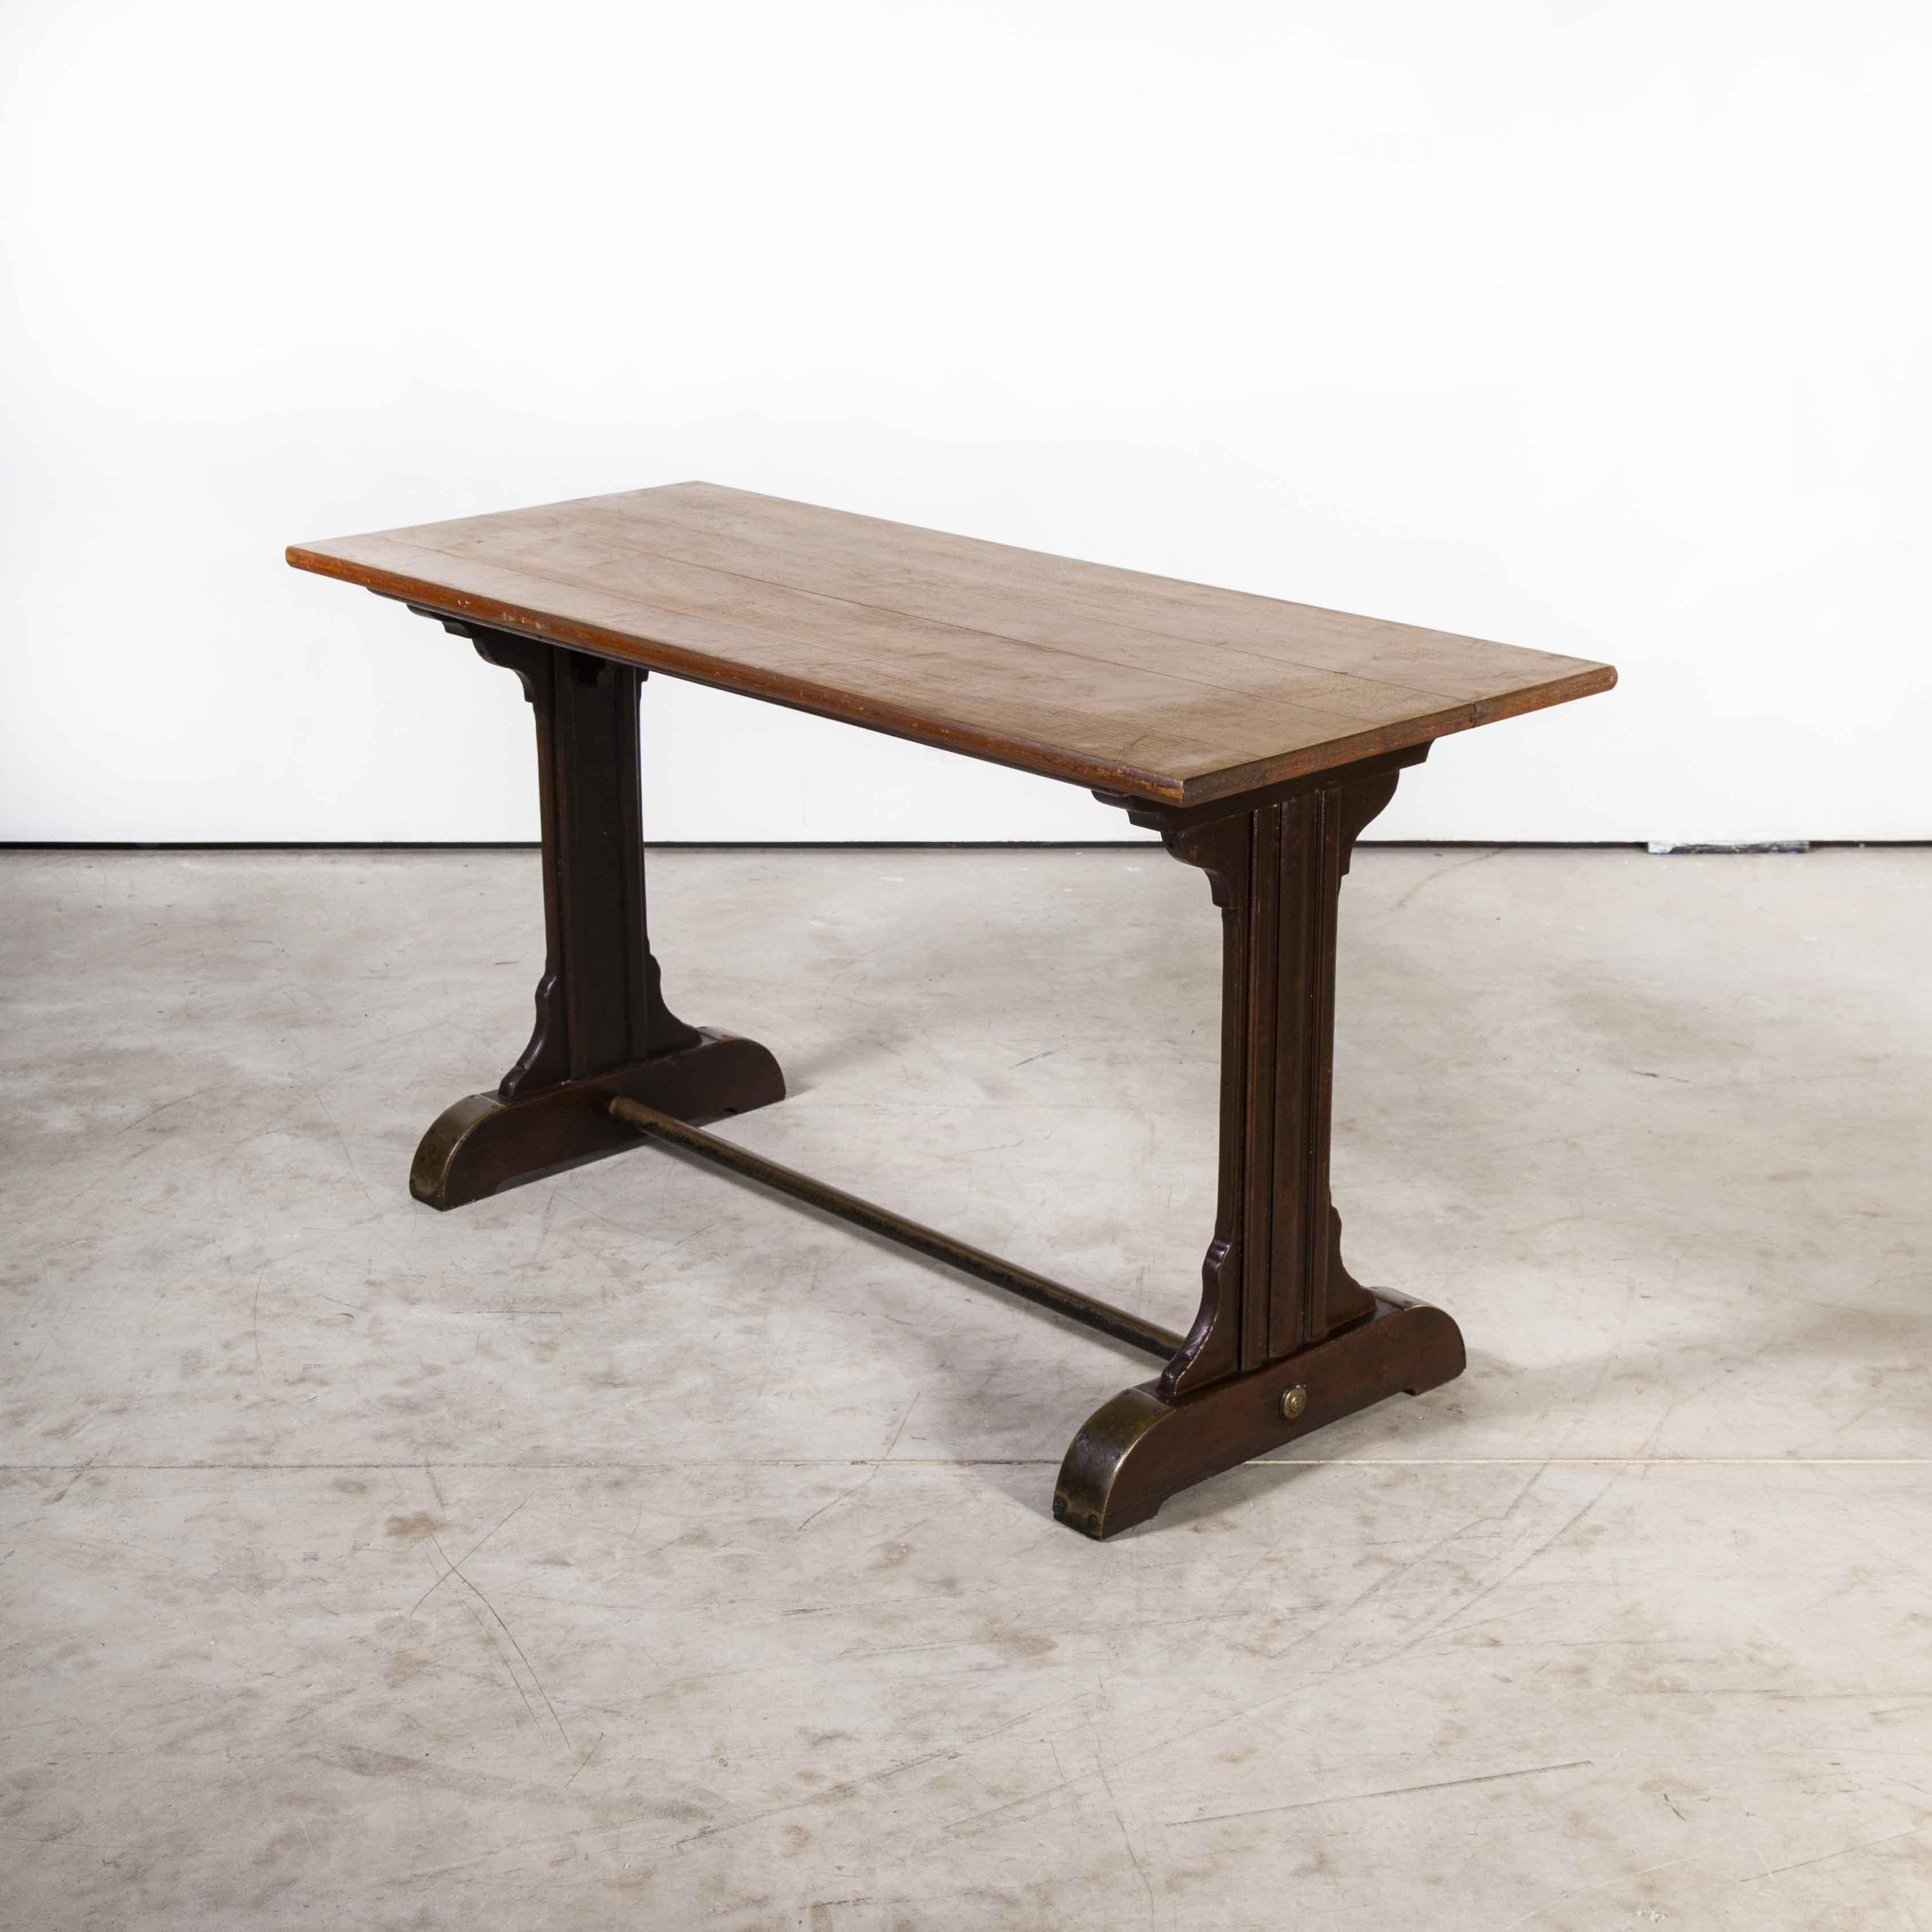 1930’s original French cafe table – rectangular dining table (Model 1114.1)
1930’s original French cafe table – rectangular dining table (114.1) Instantly familiar, this is a classic French Cafe table that has survived since the 30’s. Made in solid